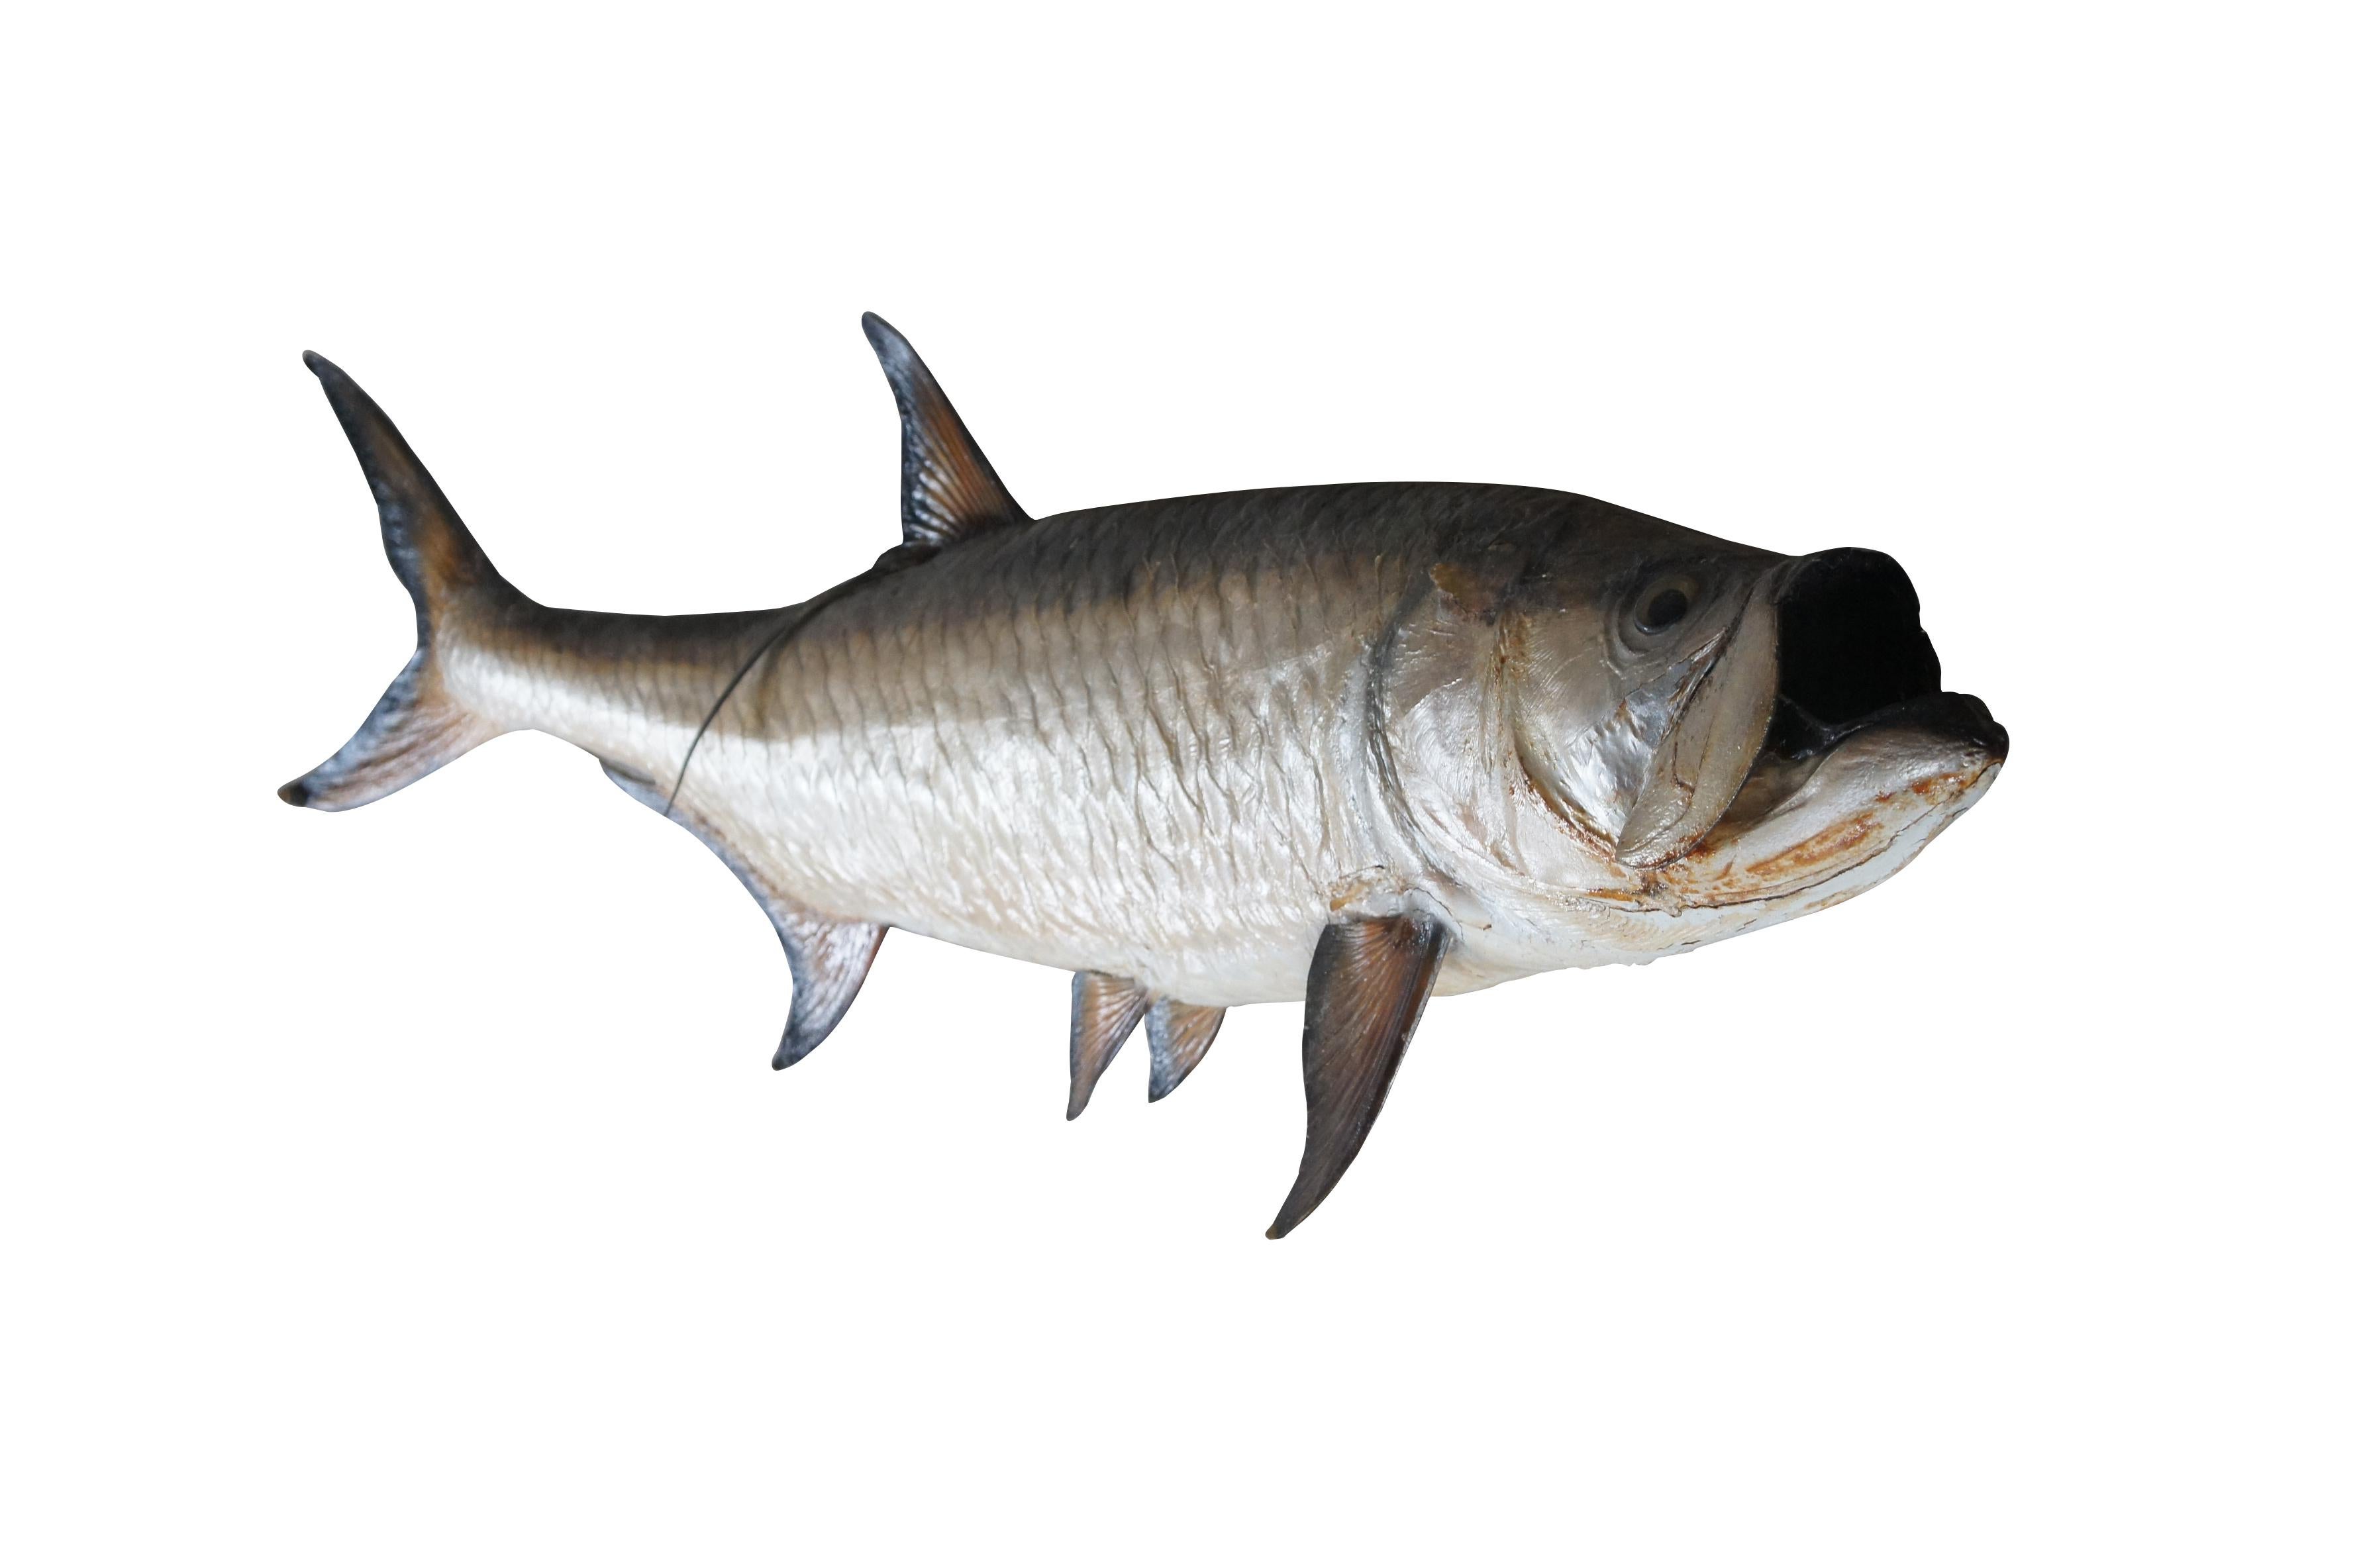 Species Details
Species Name: Megalops Atlanticus
Species Family: Megalopidae
Species Order: Elopiformes
Habitat: Inshore, Flats, Backcountry

Weight: 25 - 63 lbs.

Length: 48